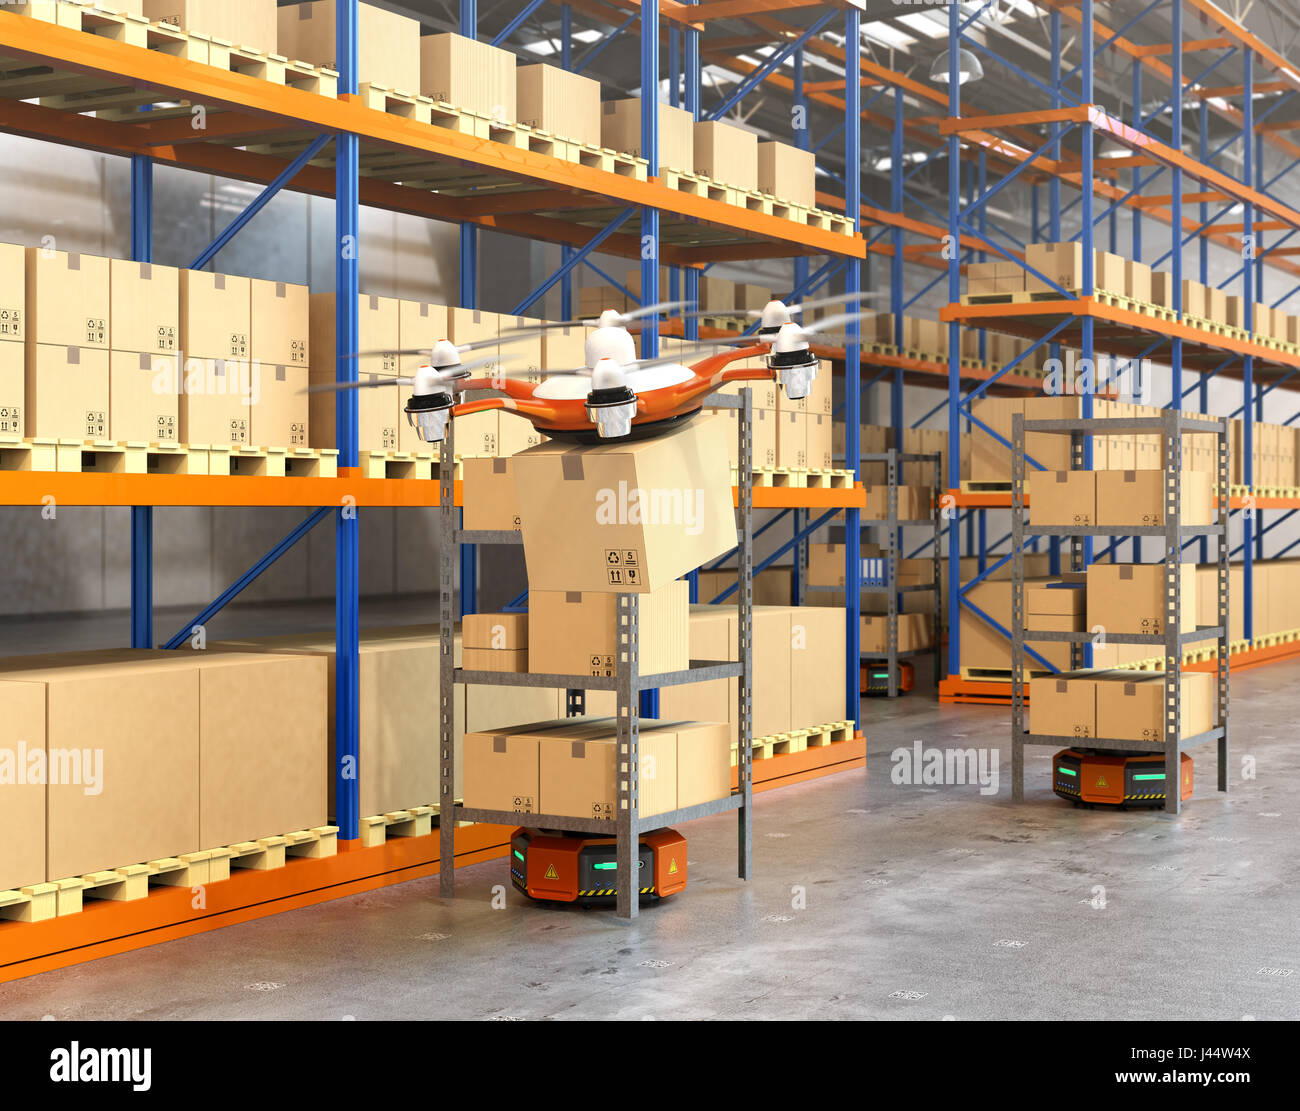 Drone and orange robots carrying goods in warehouse. Modern delivery center concept. 3D rendering image. Stock Photo